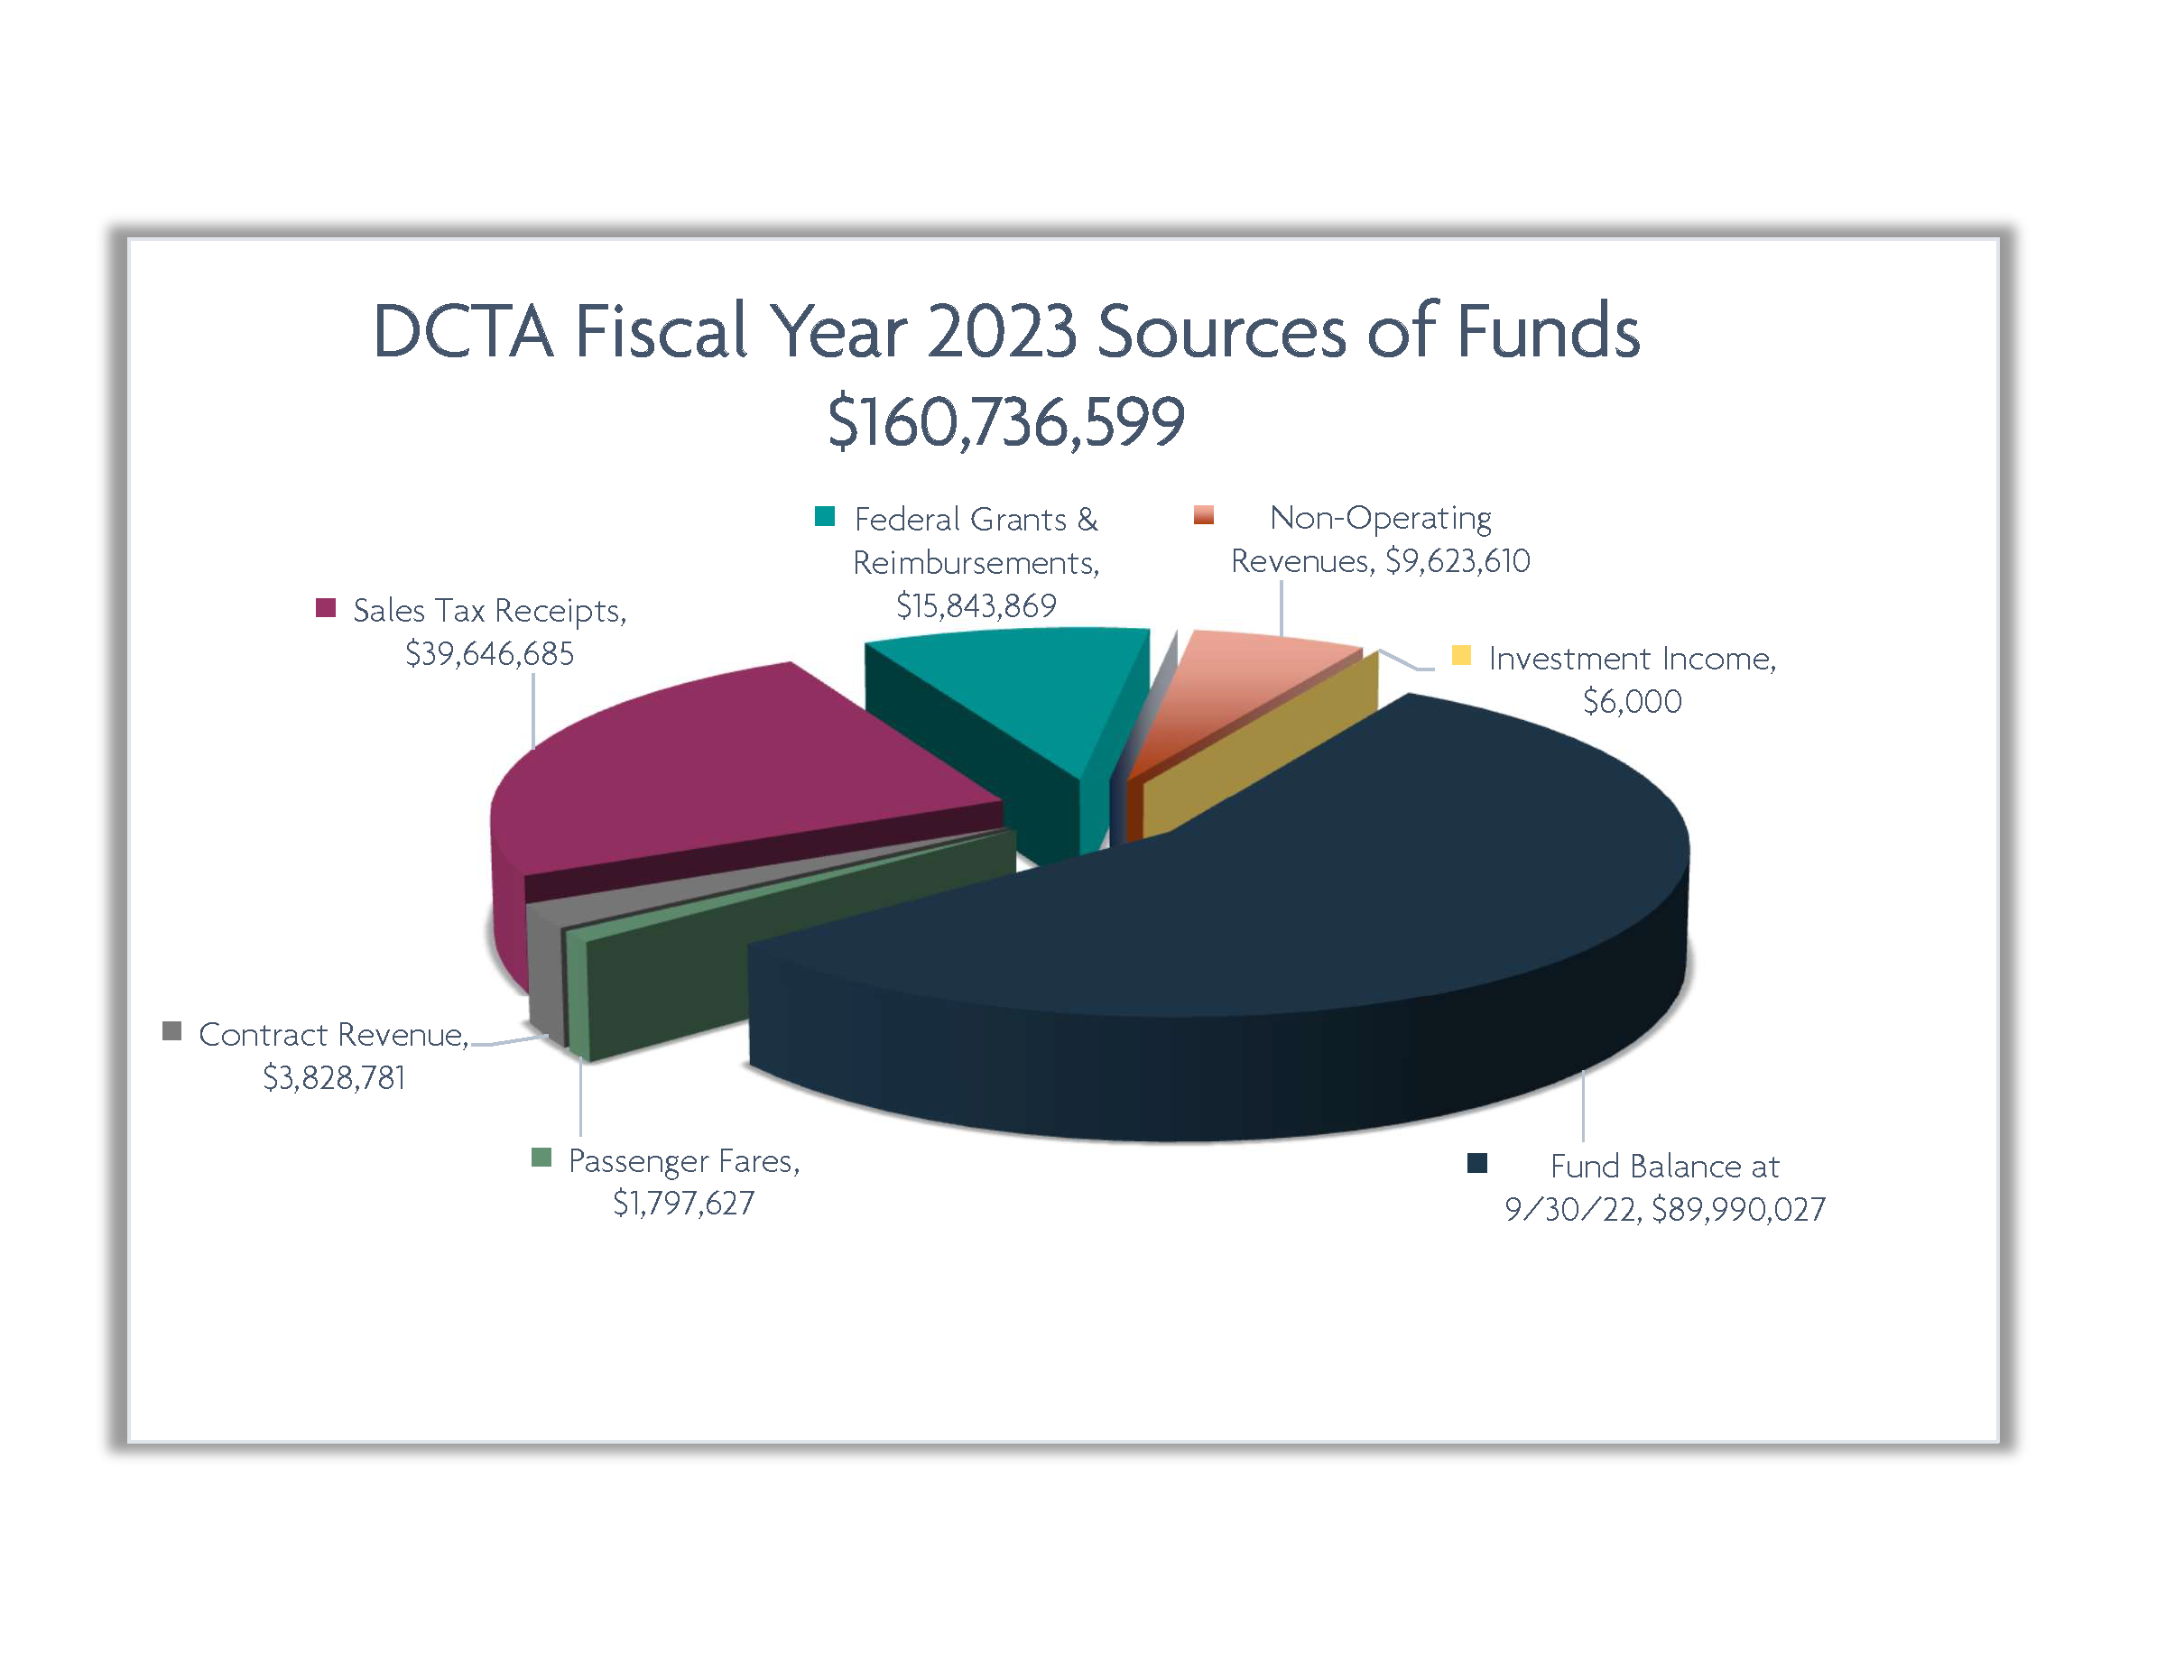 DCTA Fiscal Year 2023 Sources of Funds Pie Graph